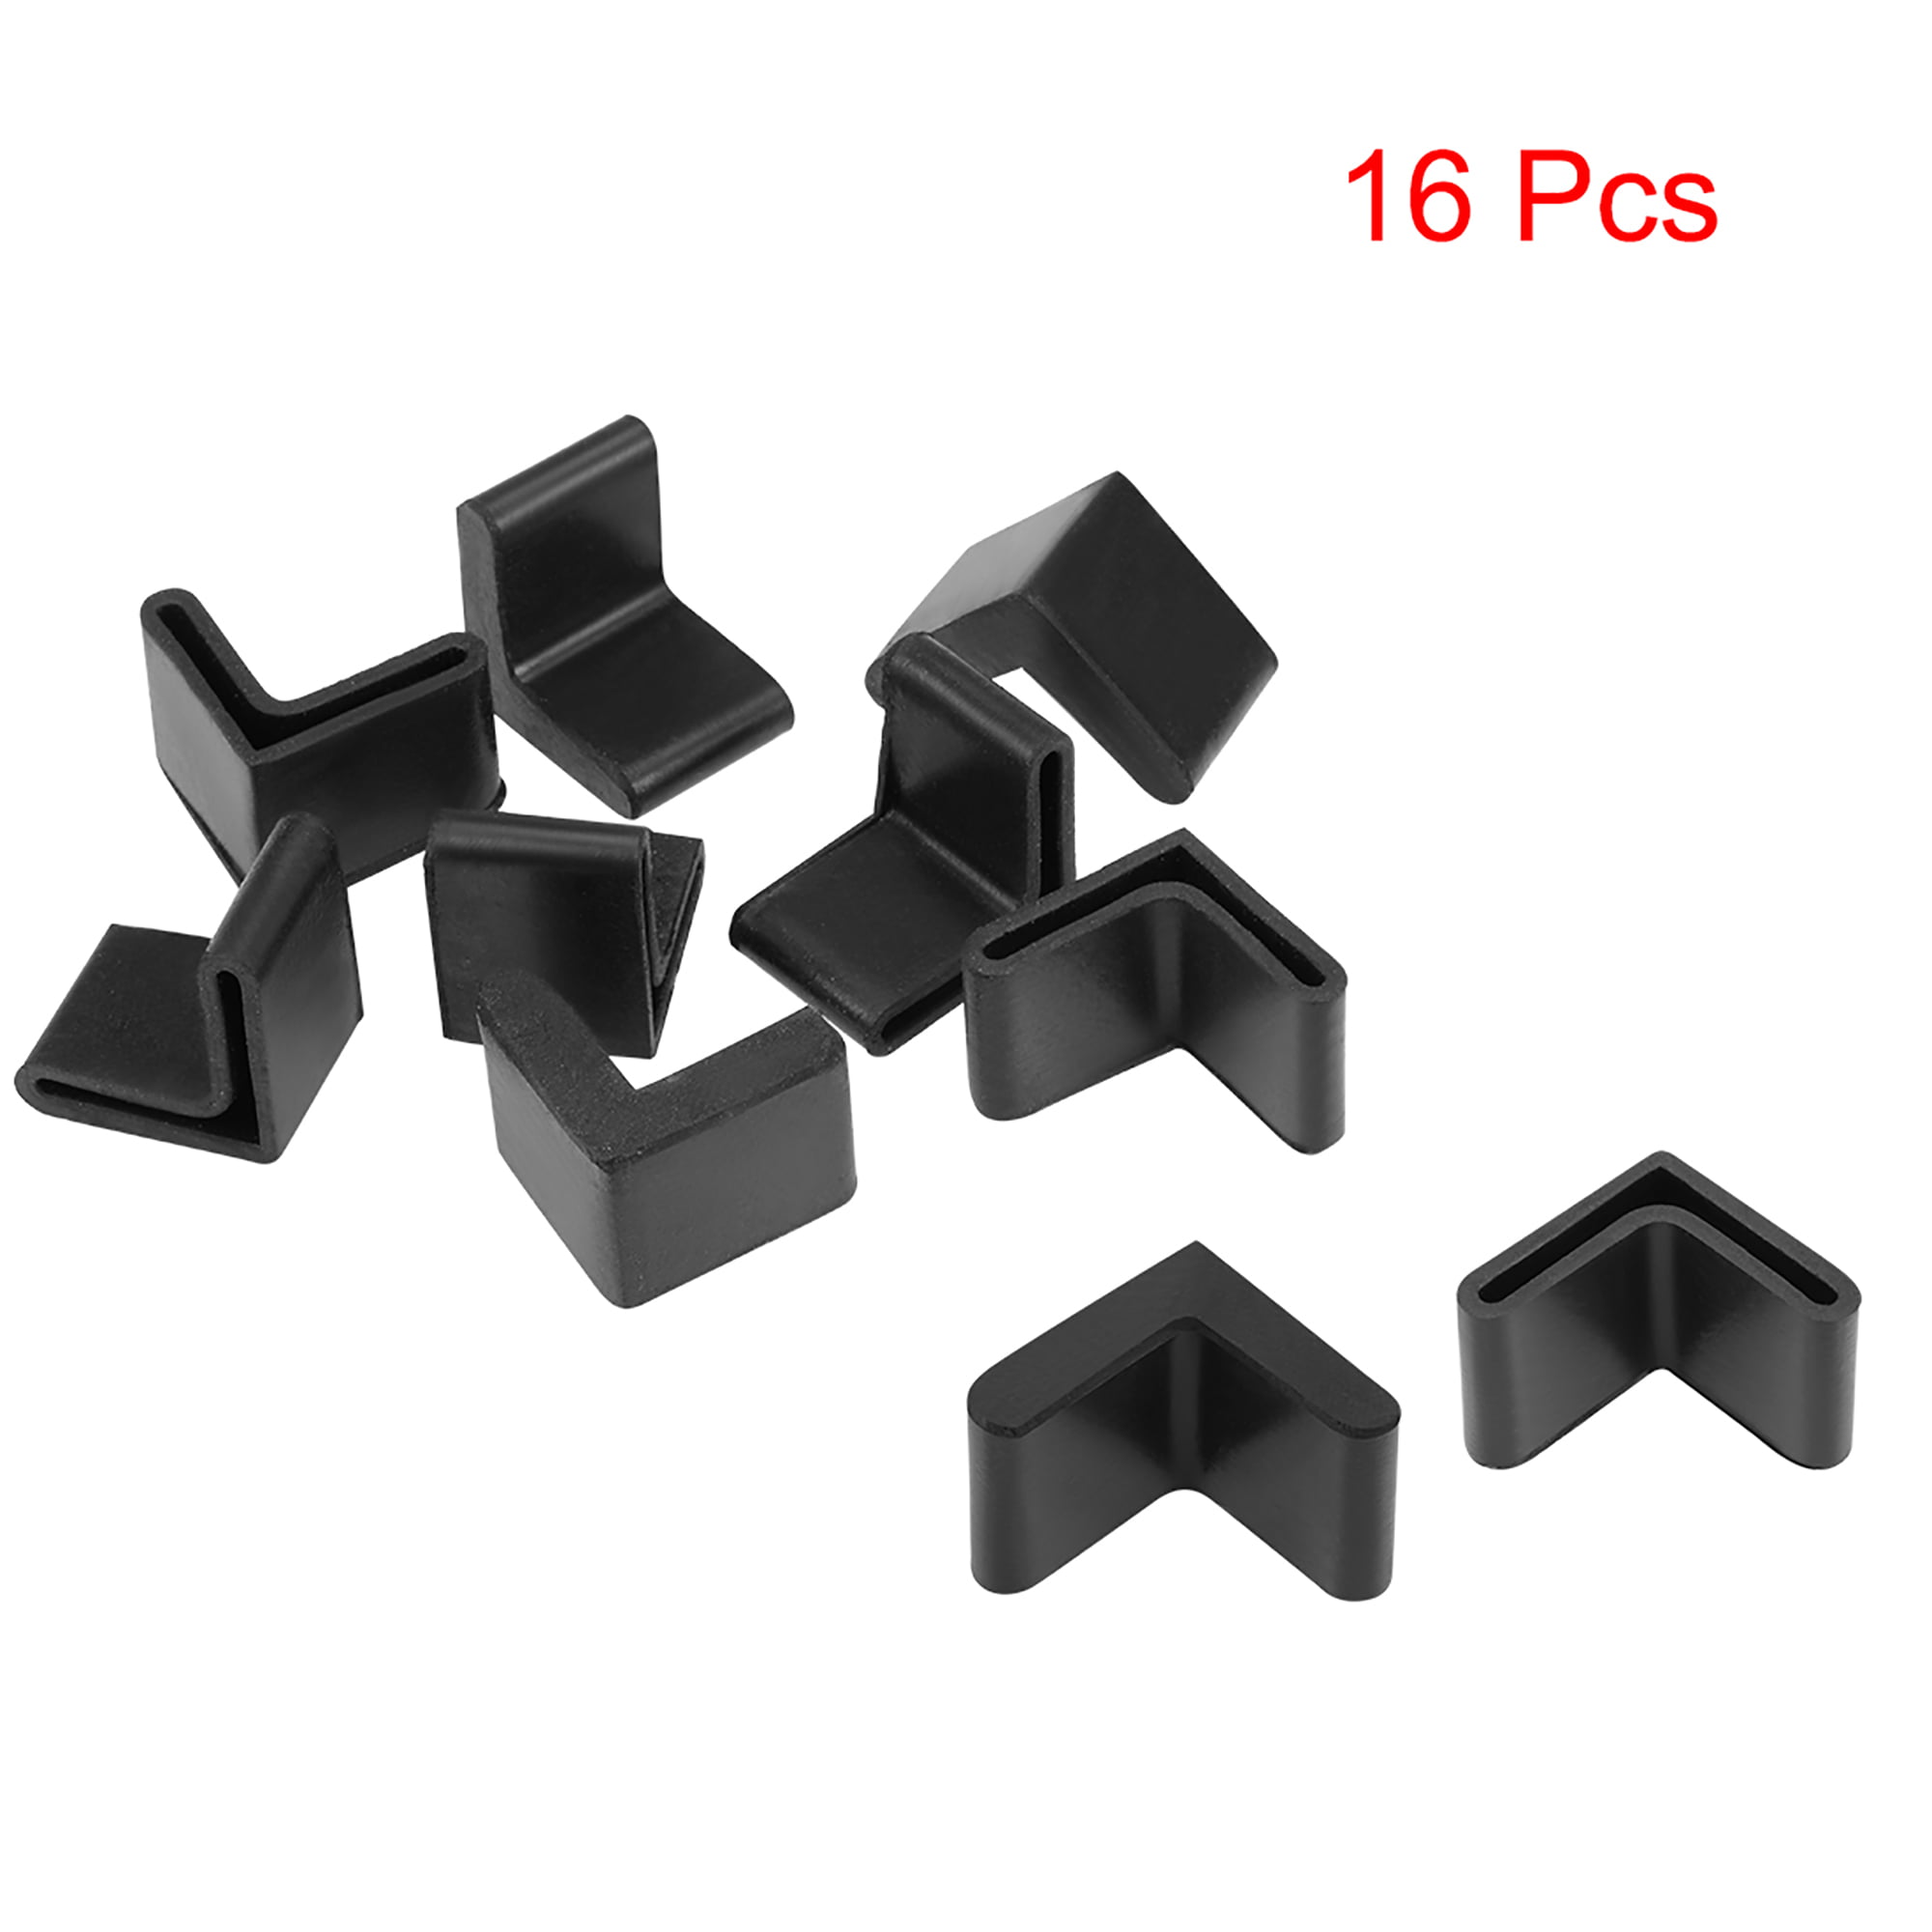 Rubber Furniture Covers Angle Caps L Shaped 29 x 29 x4mm Table Chair Legs 16Pcs 